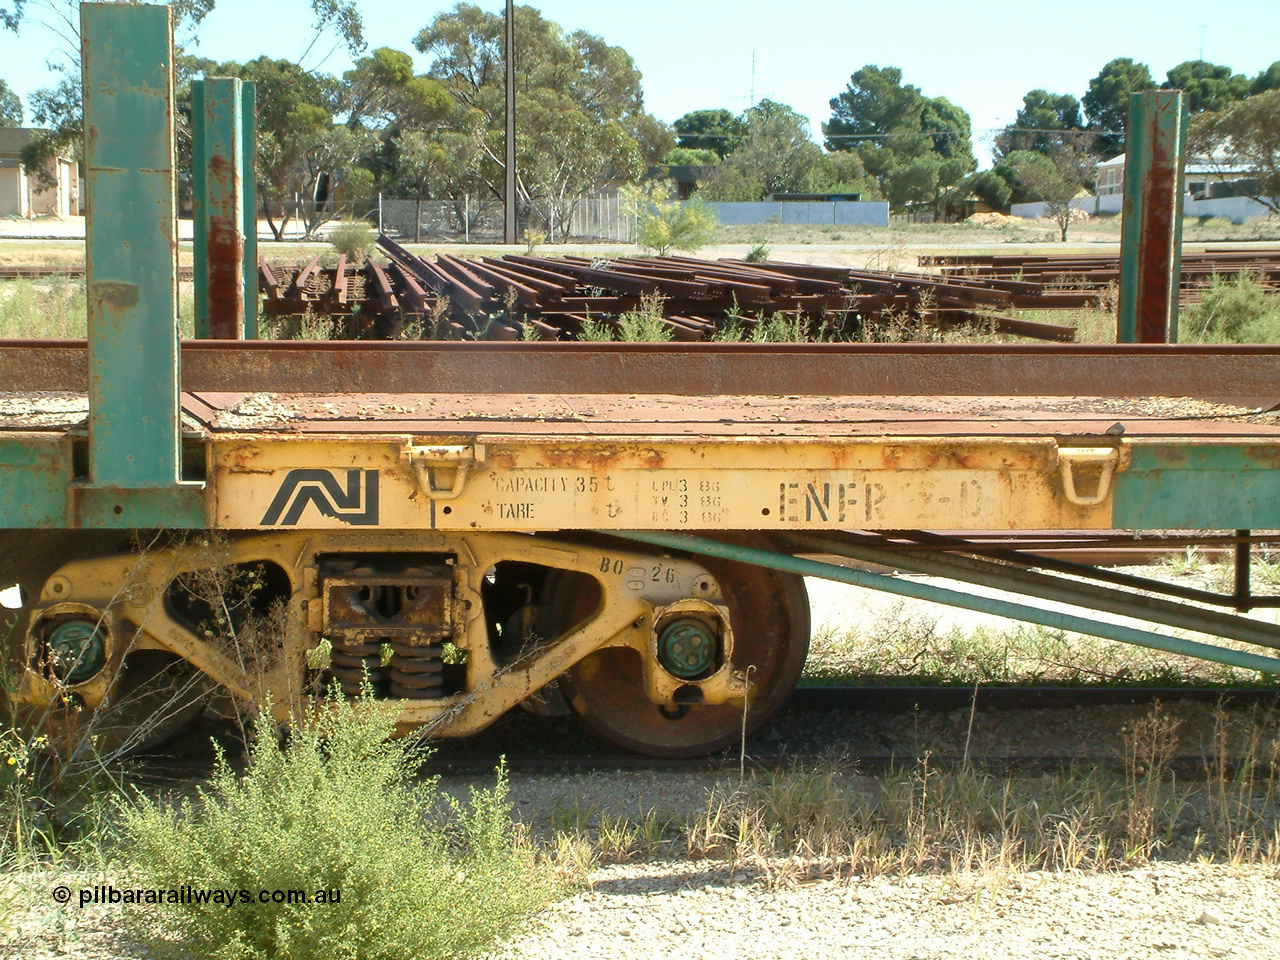 030411 110040
Kimba, rail transport waggon ENFR 2, originally built as 40' flat waggon NRF 900 in 1943. Transferred to Eyre Peninsula in 1984 and recoded to ENFR in 1985. Scrapped here at Kimba in 2005.
Keywords: ENFR-type;ENFR2;NRF900;NRF-type;